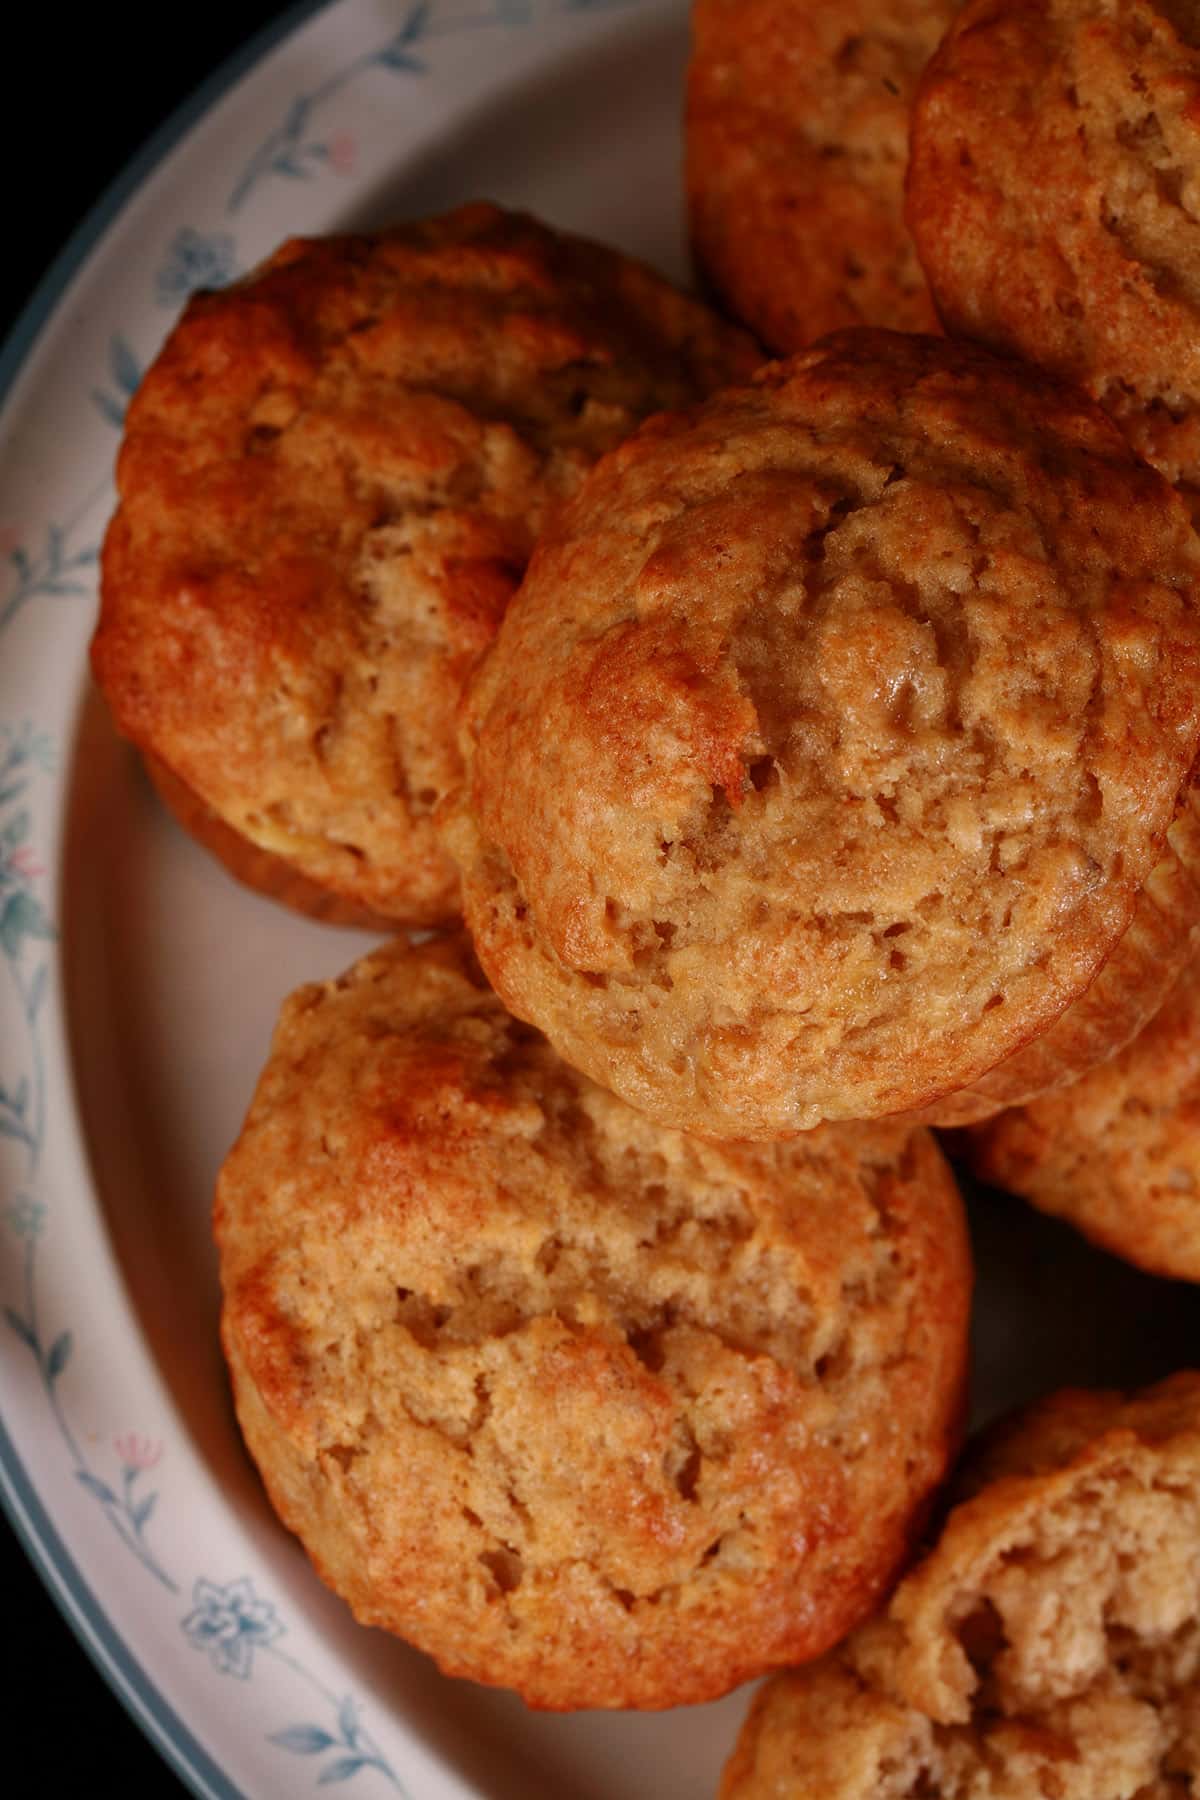 A plate of banana nut muffins.